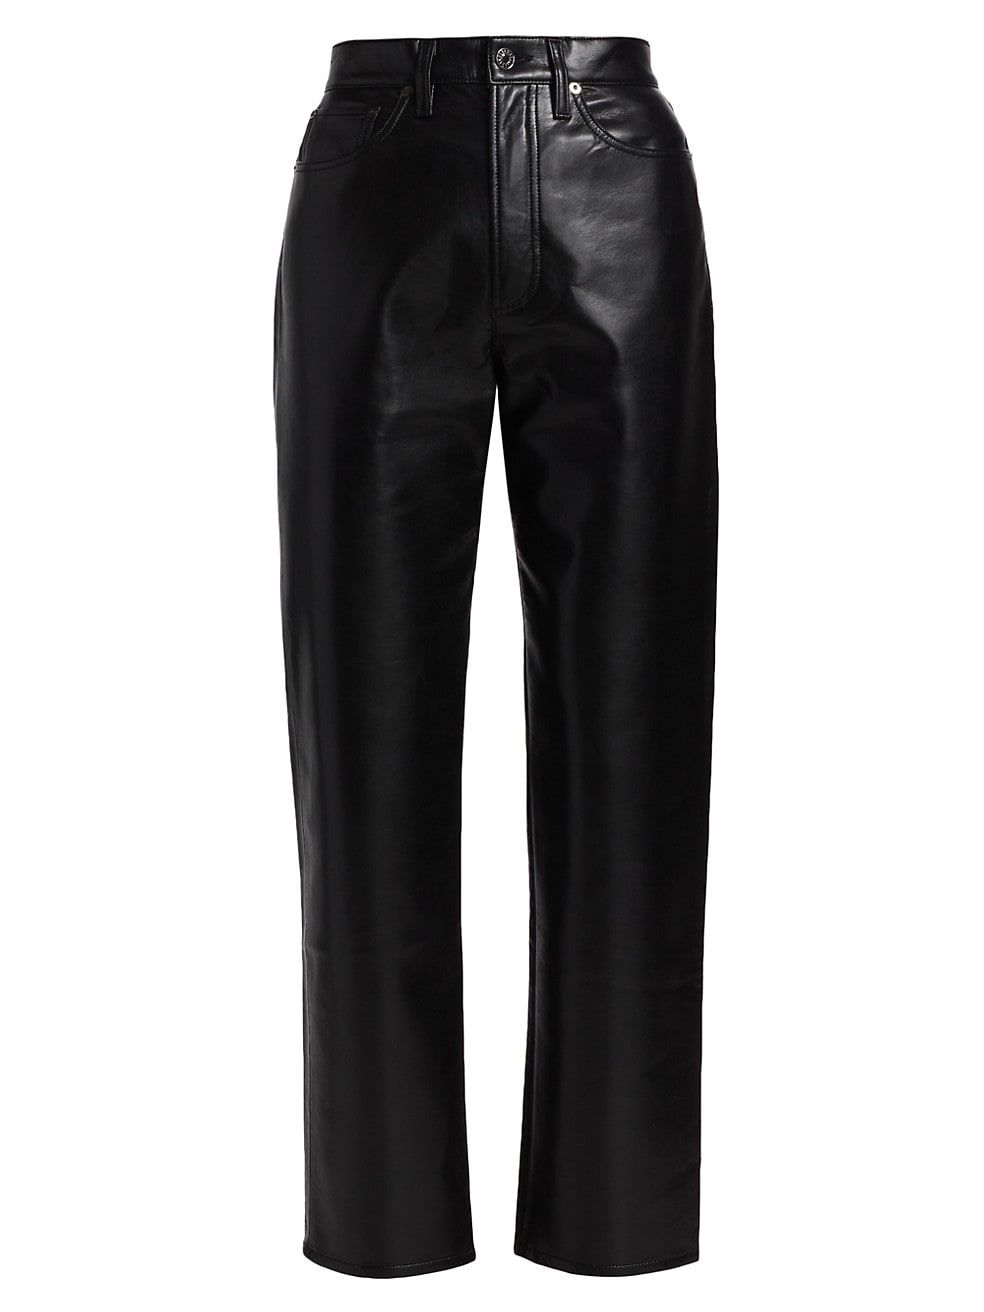 AGOLDE Recycled Leather Pants | Saks Fifth Avenue